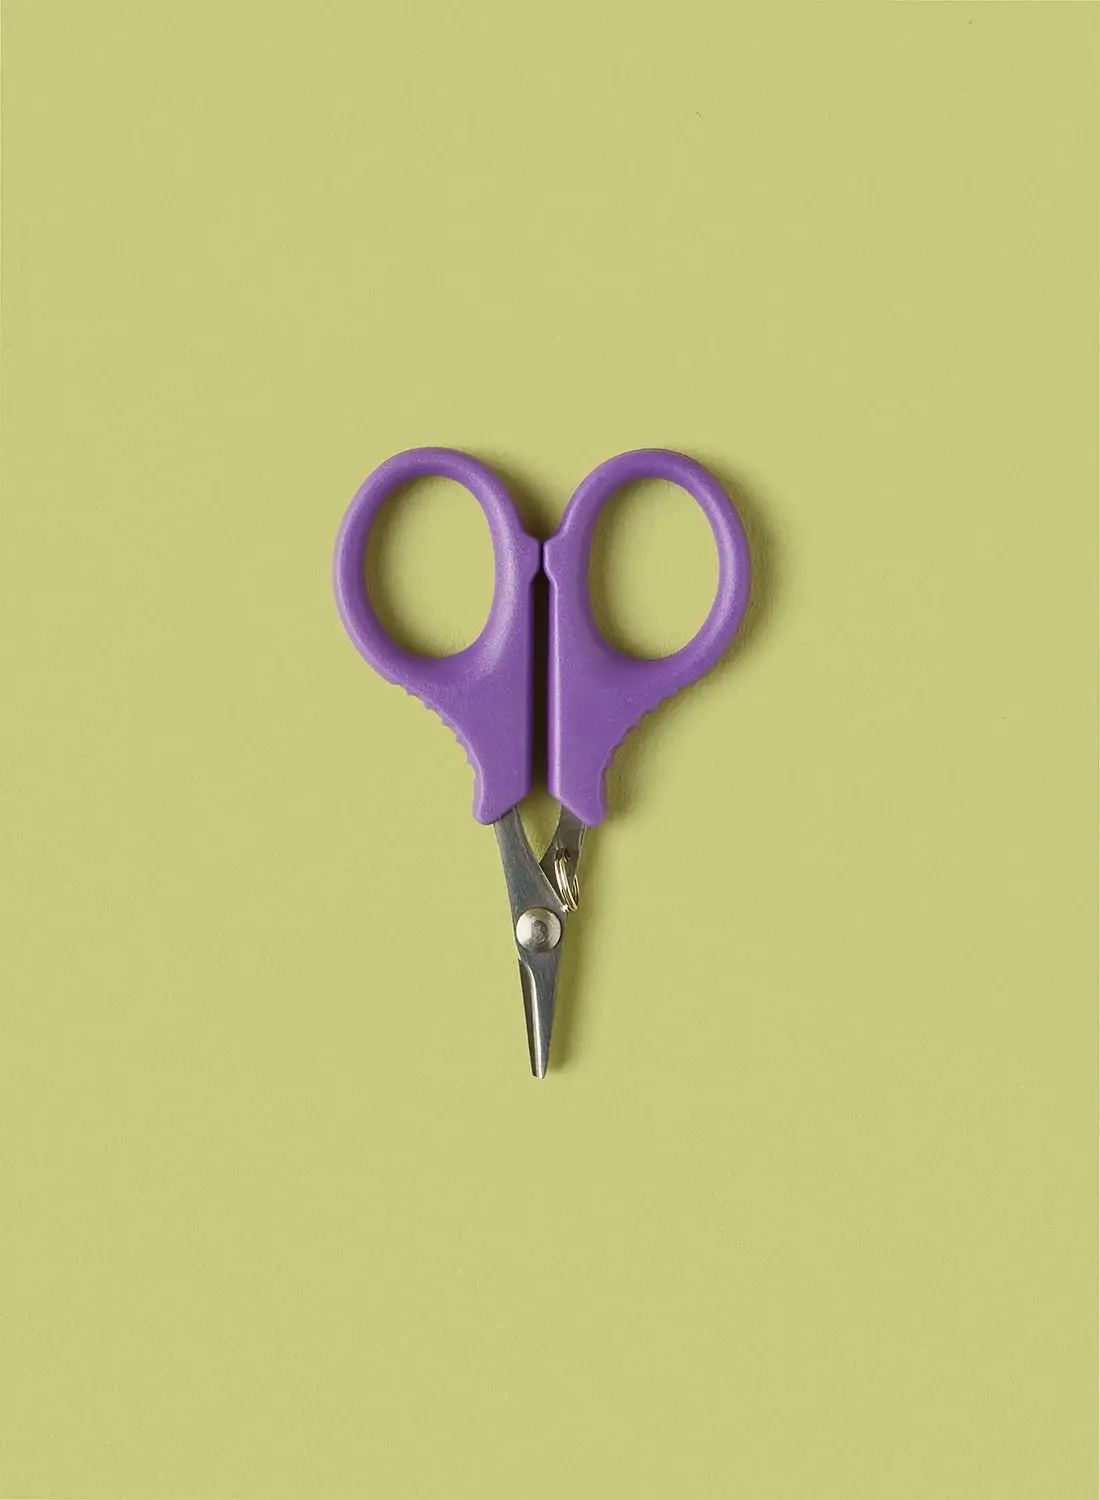 noon east Kitchen Scissors - With Stainless Steel Blades - Essential Kitchen Scissors - Kitchen Accessories - Kitchen Tools - Purple/Silver